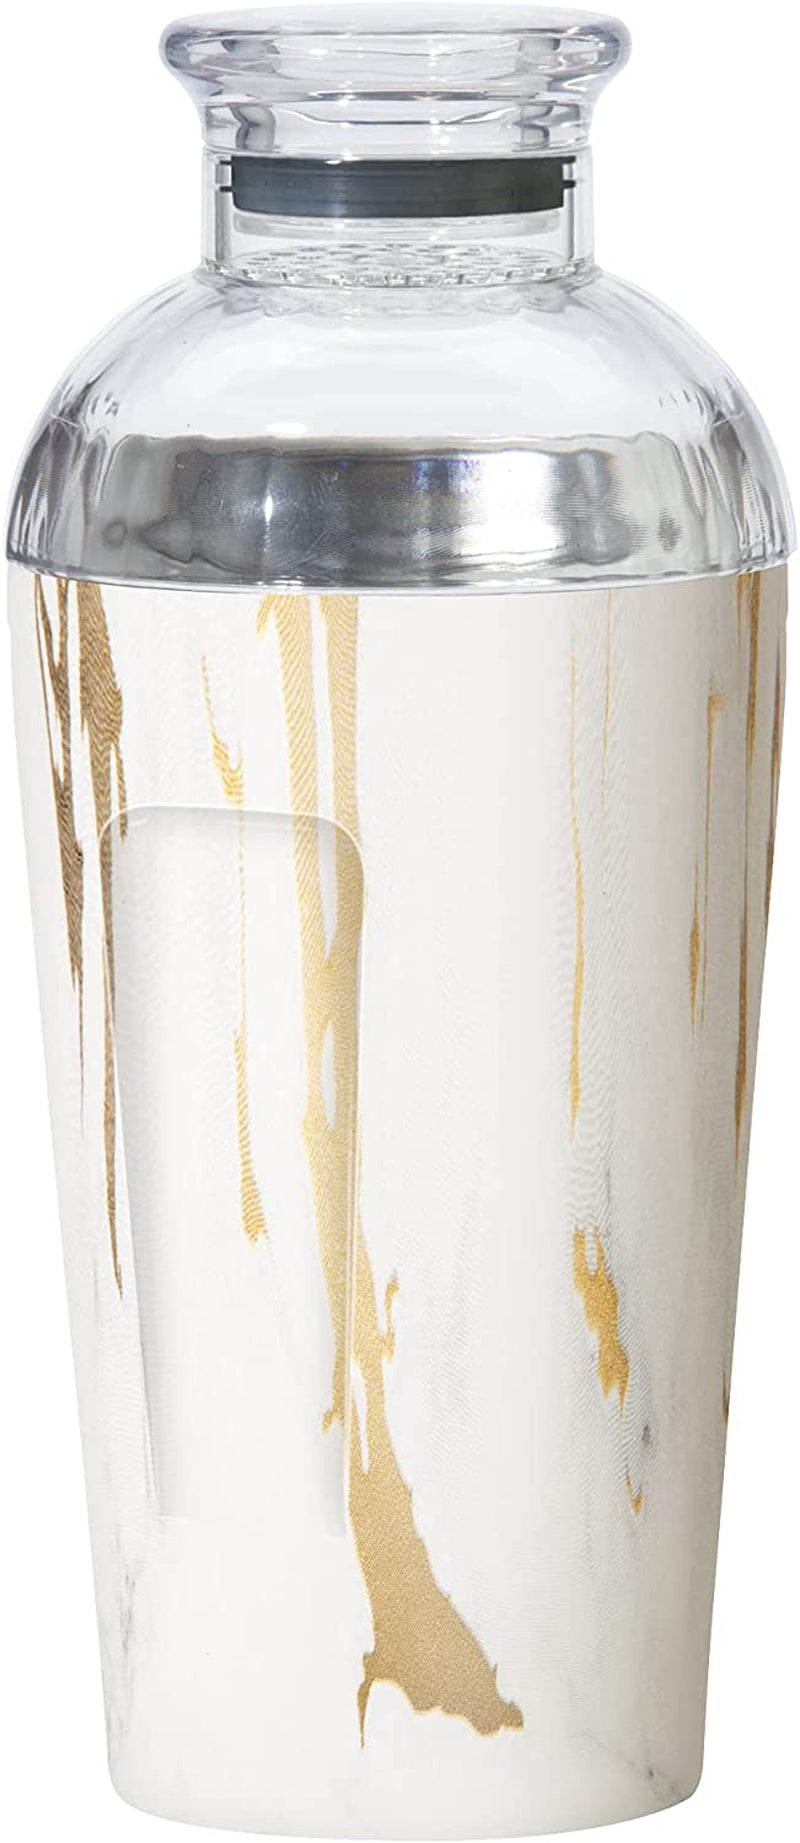 Oggi Groove Insulated Cocktail Shaker-17Oz Double Wall Vacuum Insulated Stainless Steel Shaker, Tritan Lid Has Built in Strainer, Ideal Cocktail, Martini Shaker, Margarita Shaker, Gold (7404.4)